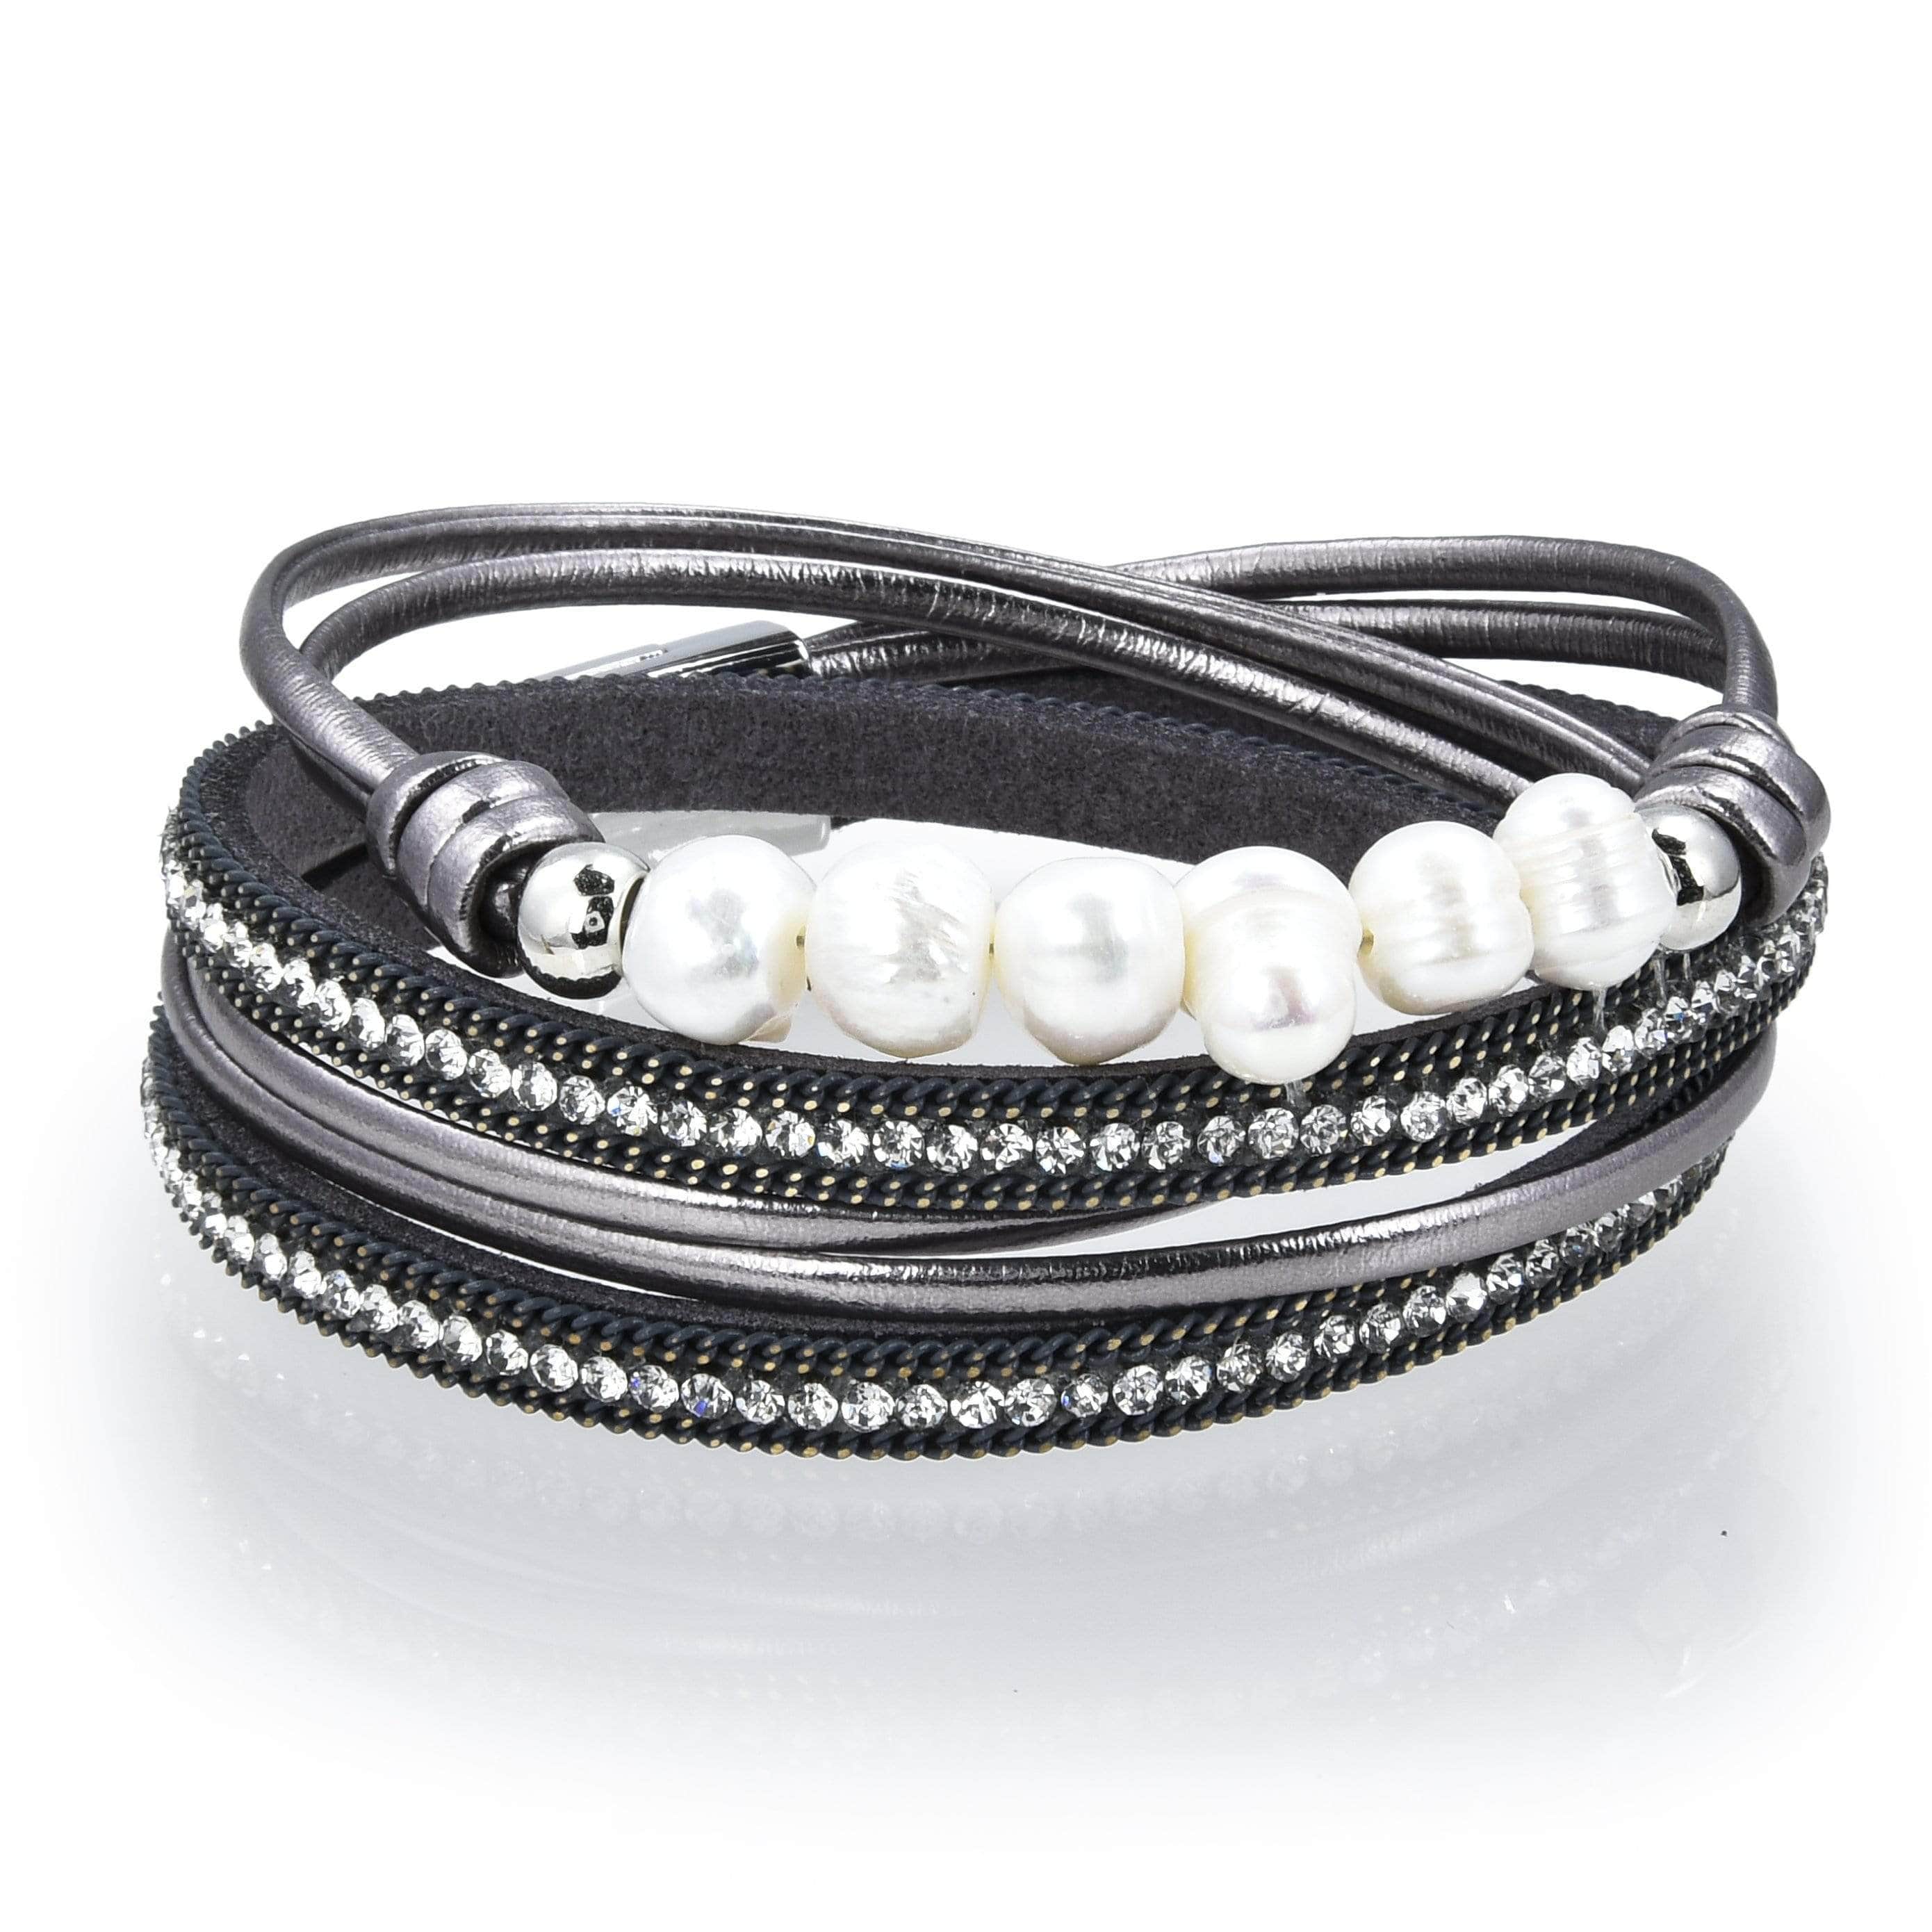 Kalifano Multiwrap Bracelets Multiple Strand Pearl and Diamonds Gray Bracelet with Magnetic Clasp BMW-20-GY